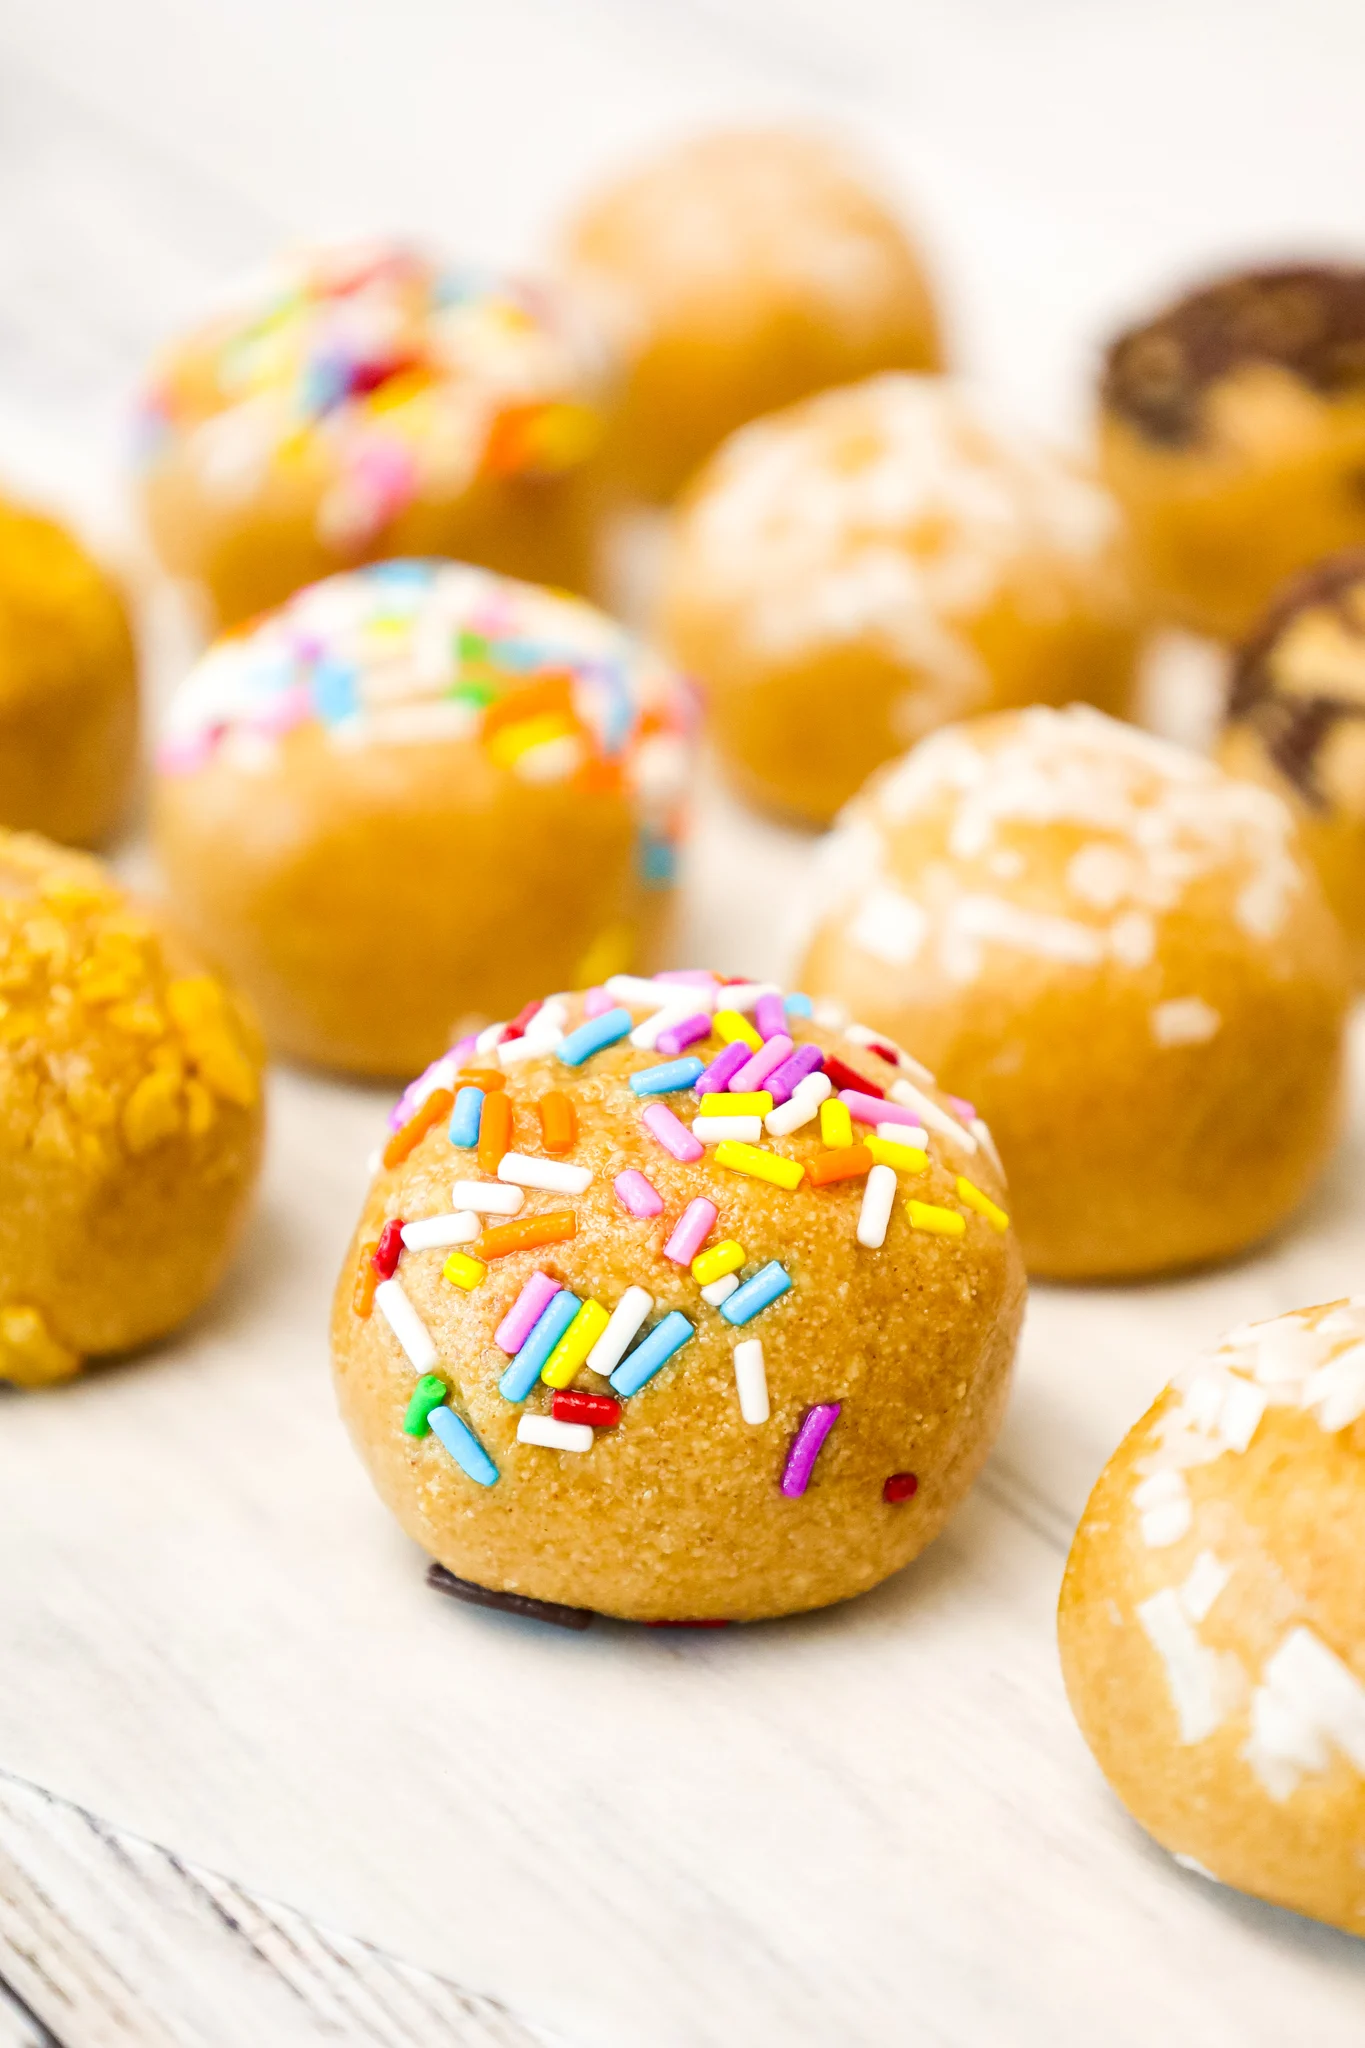 Old Fashioned Peanut Butter Balls are a tasty bite sized snack or dessert recipe that both children and adults will love.